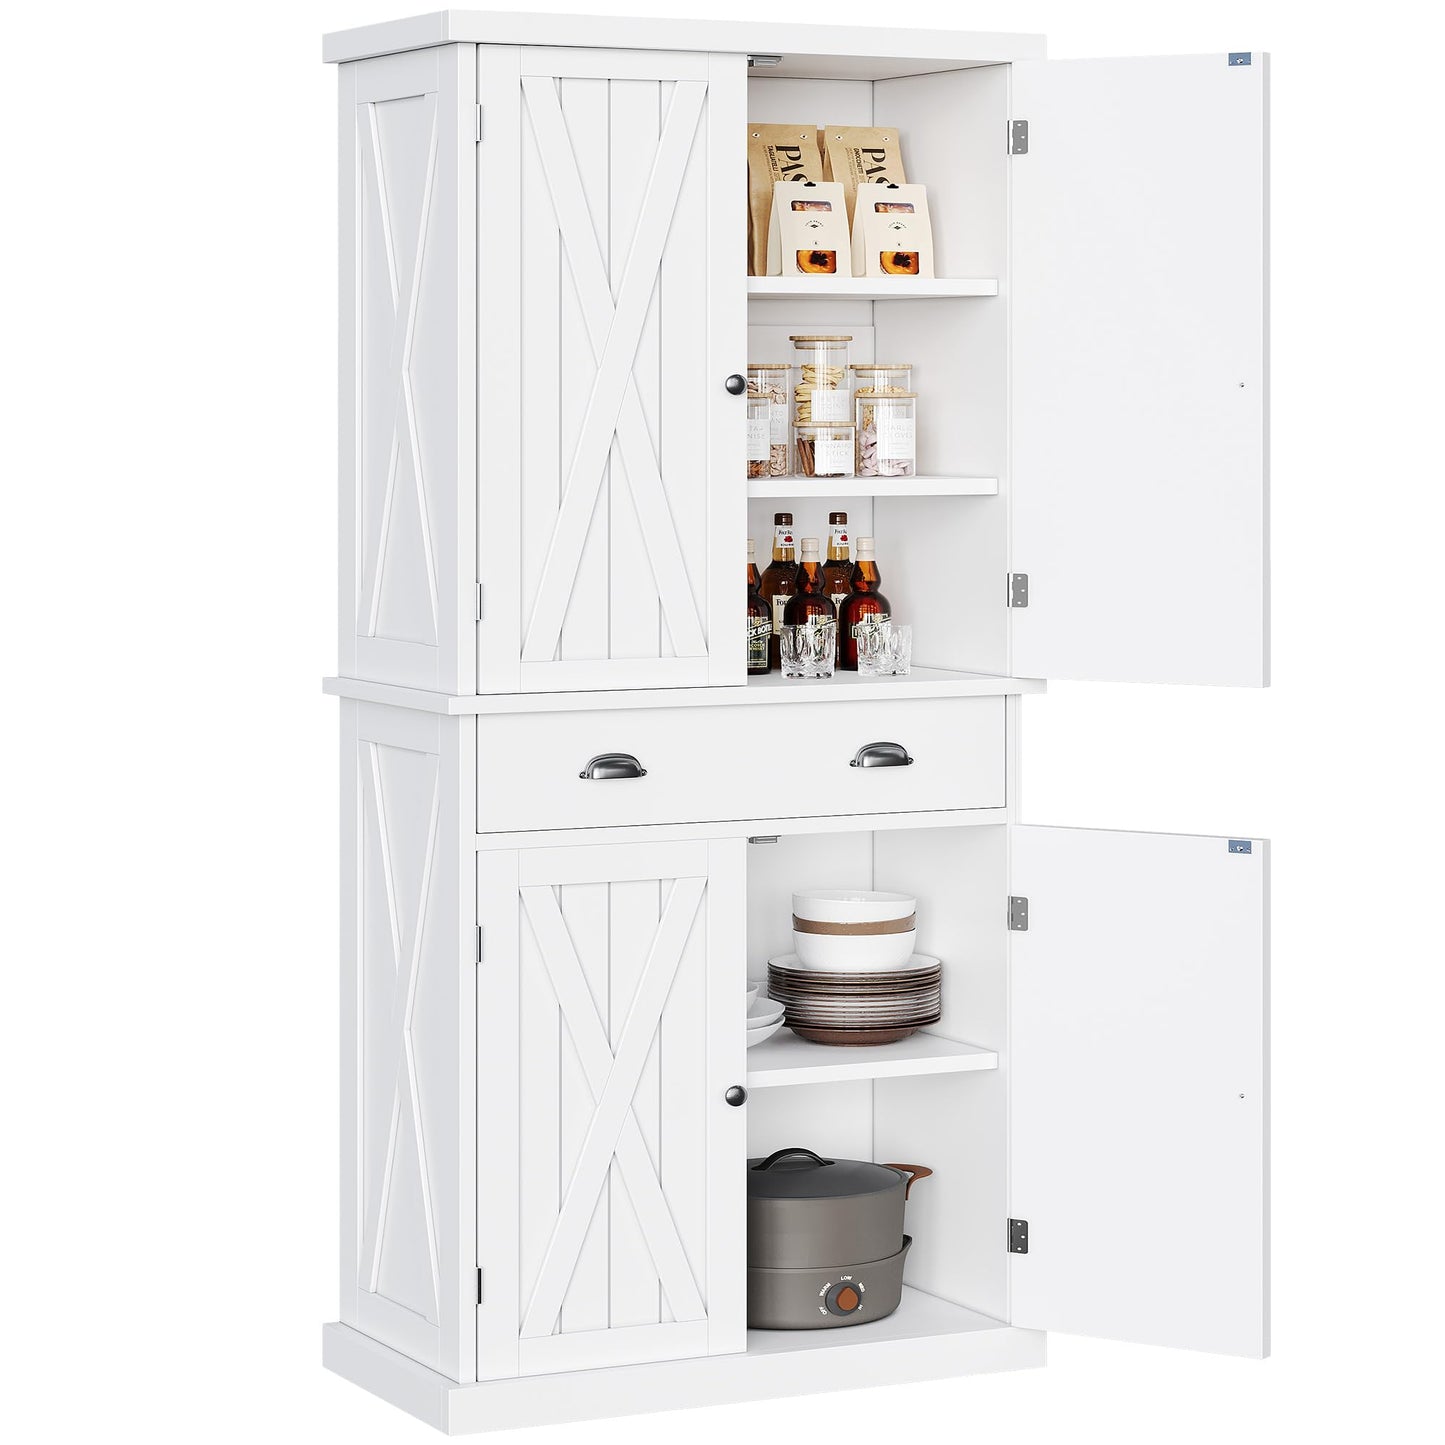 YITAHOME 72'' Farmhouse Kitchen Pantry Storage Cabinet, Tall Freestanding Cupboard with Drawer and Adjustable Shelves, Sideboard Buffet Cabinet for Kitchen, Dining Room, Living Room, White